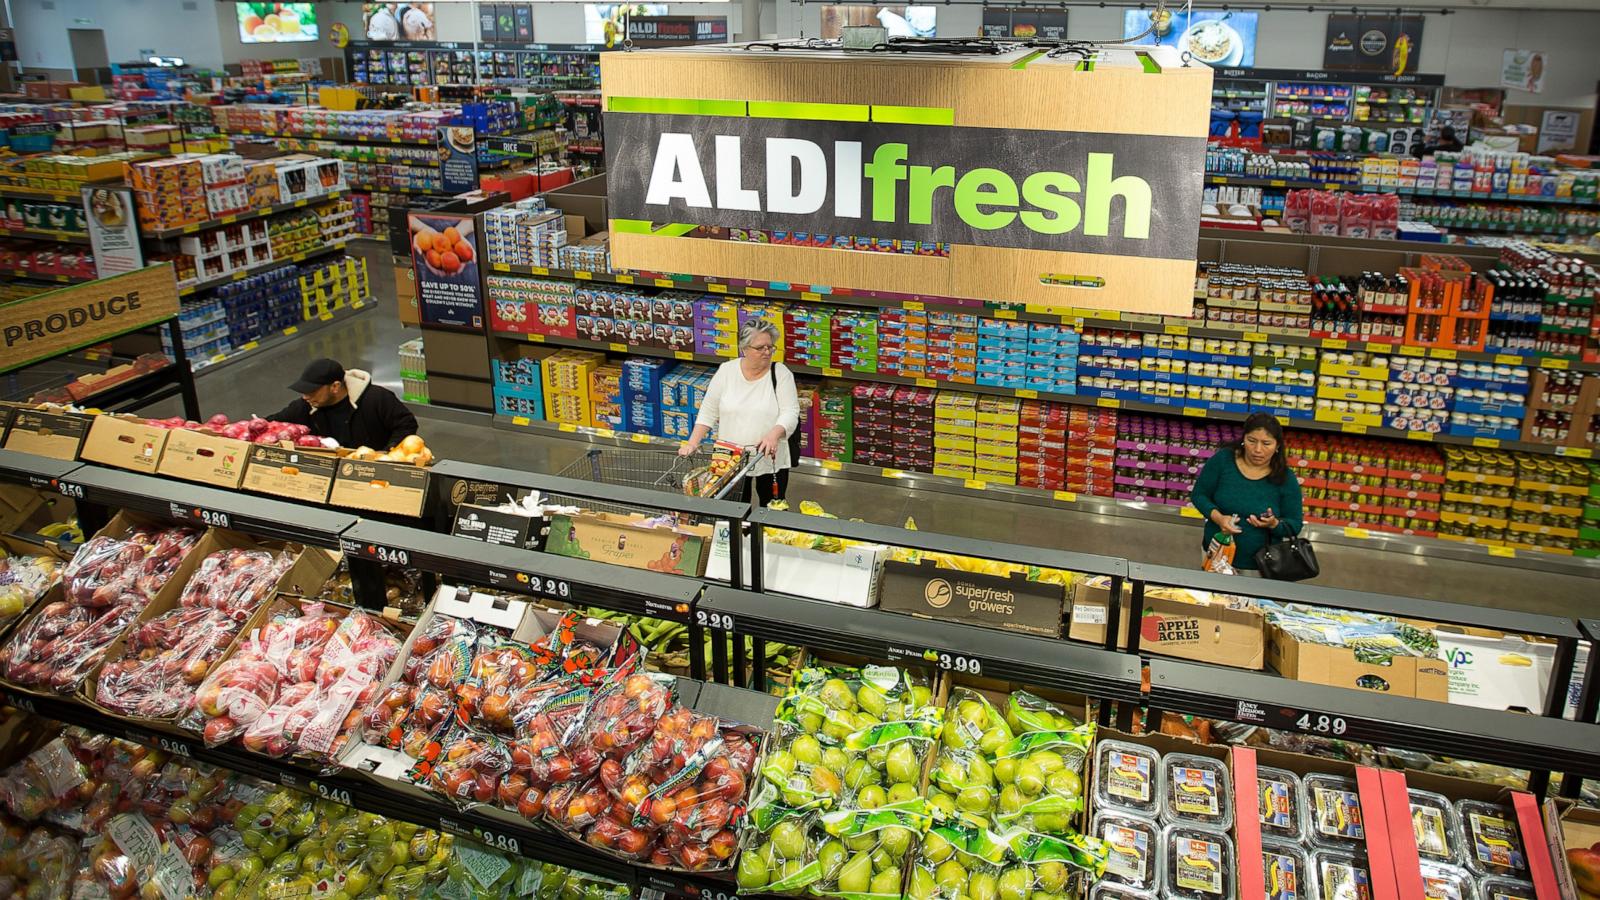 PHOTO: In this June 8, 2017, file photo, customers shop for produce at an Aldi Stores Ltd. location in Hackensack, New Jersey.